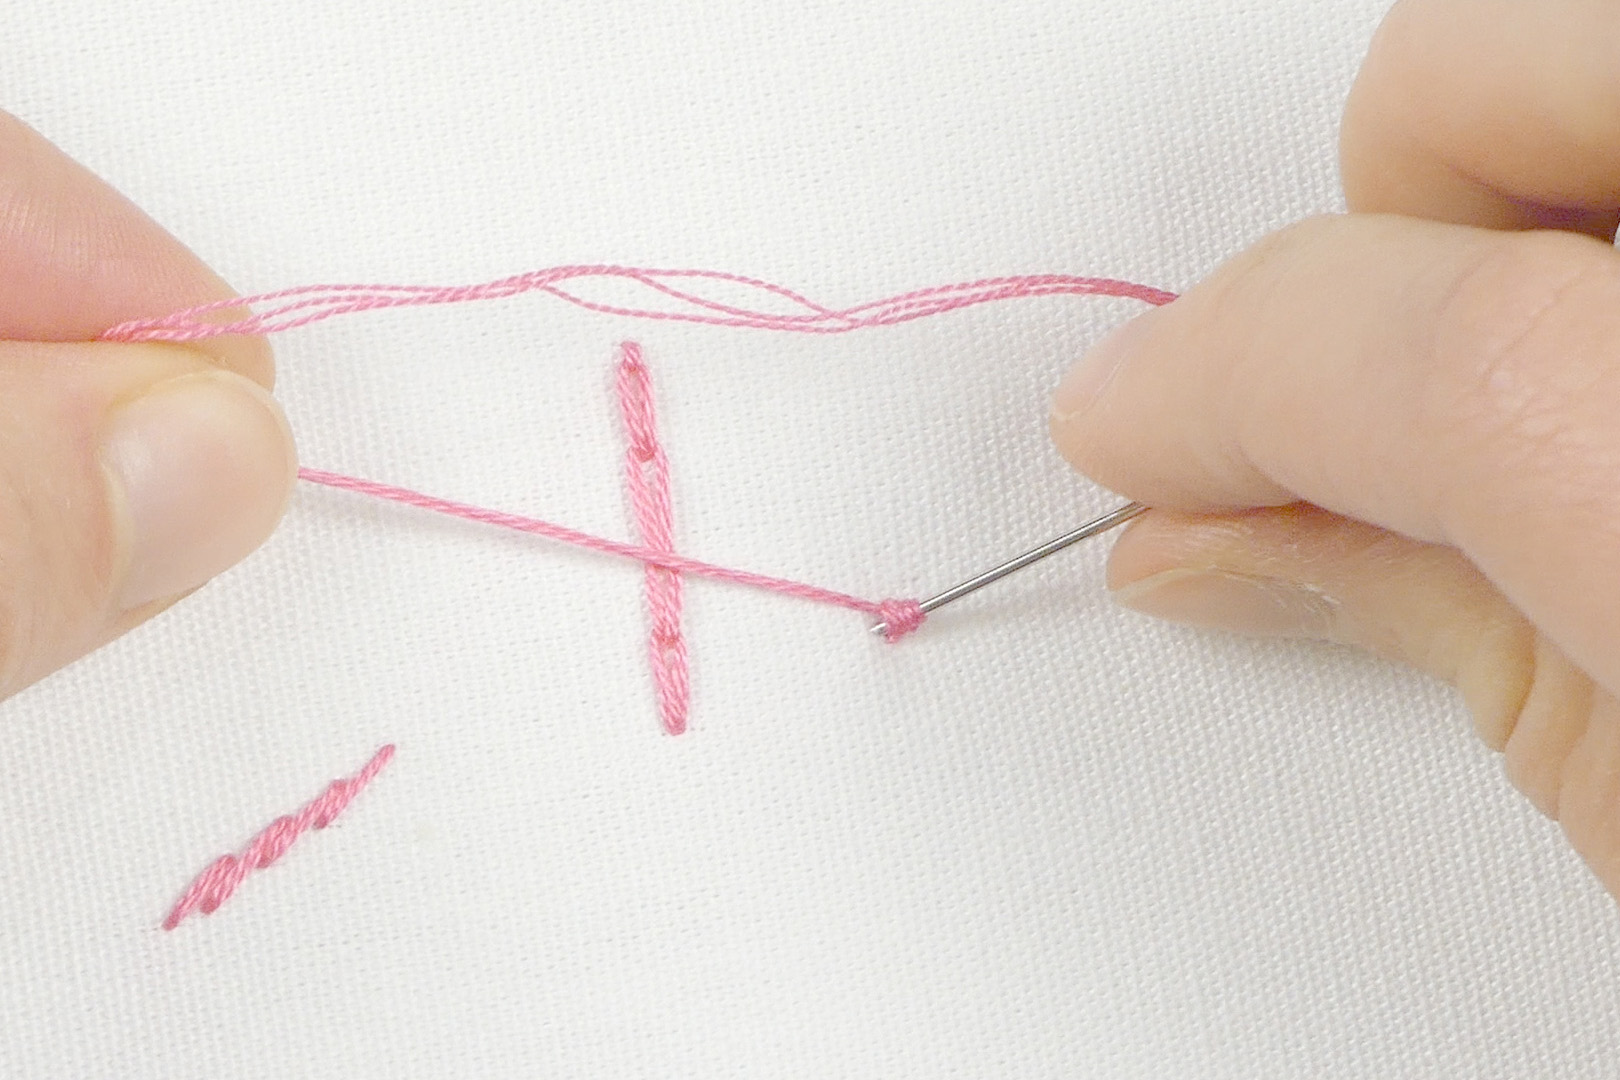 3 Embroidery Stitches That Will Level Up Your Skills